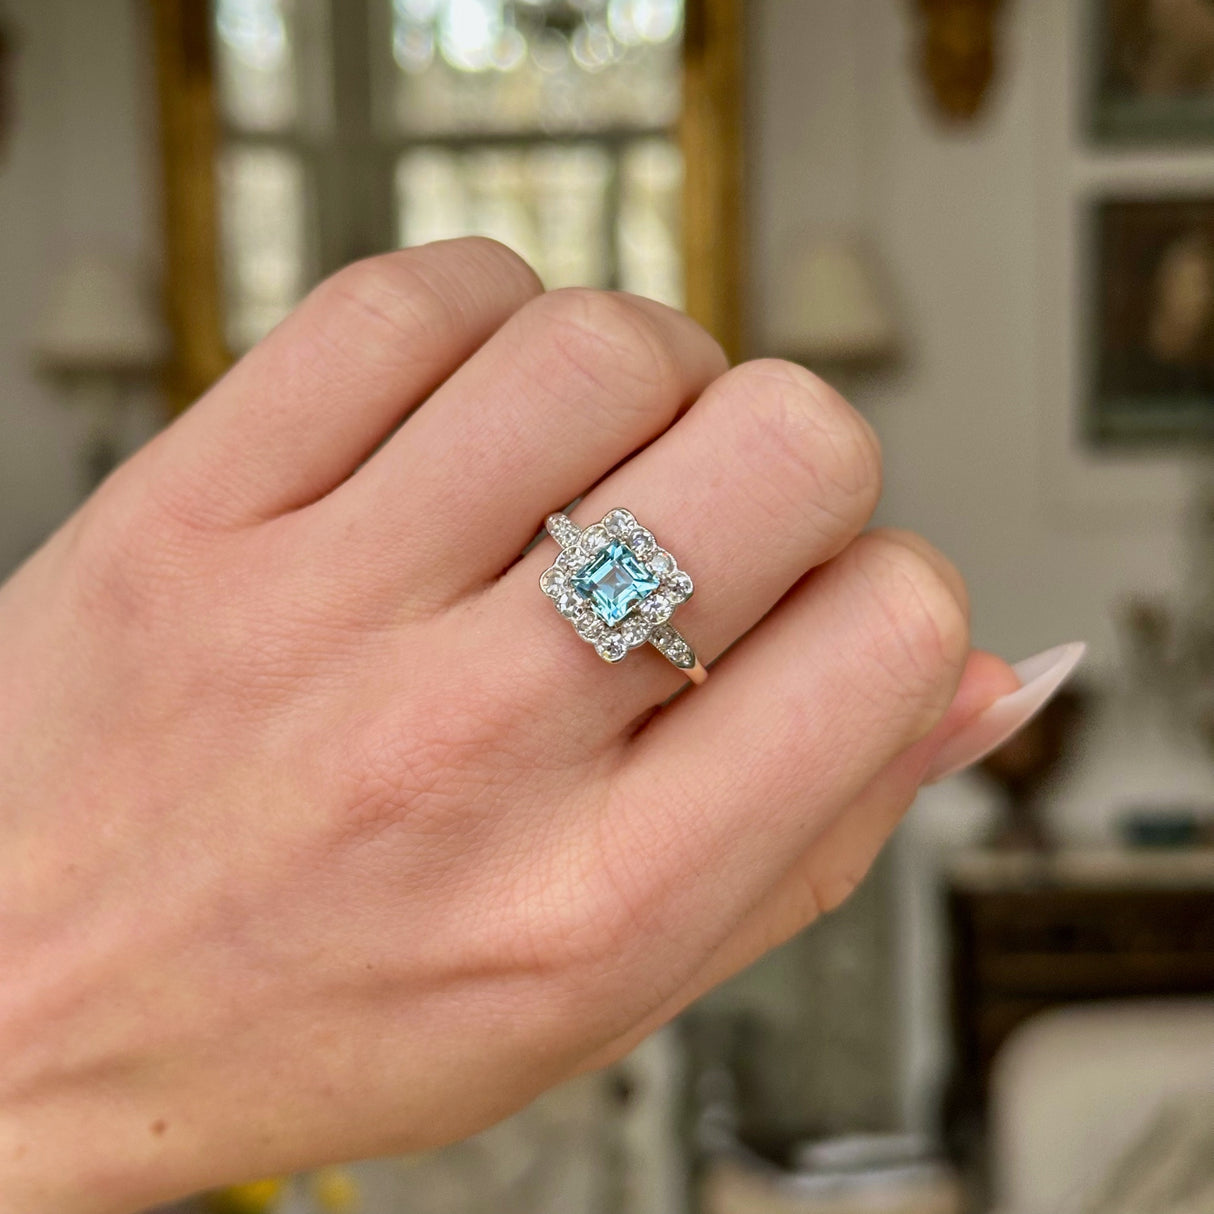 Antique, Edwardian Aquamarine and Diamond Square Cluster Ring, worn on closed hand.